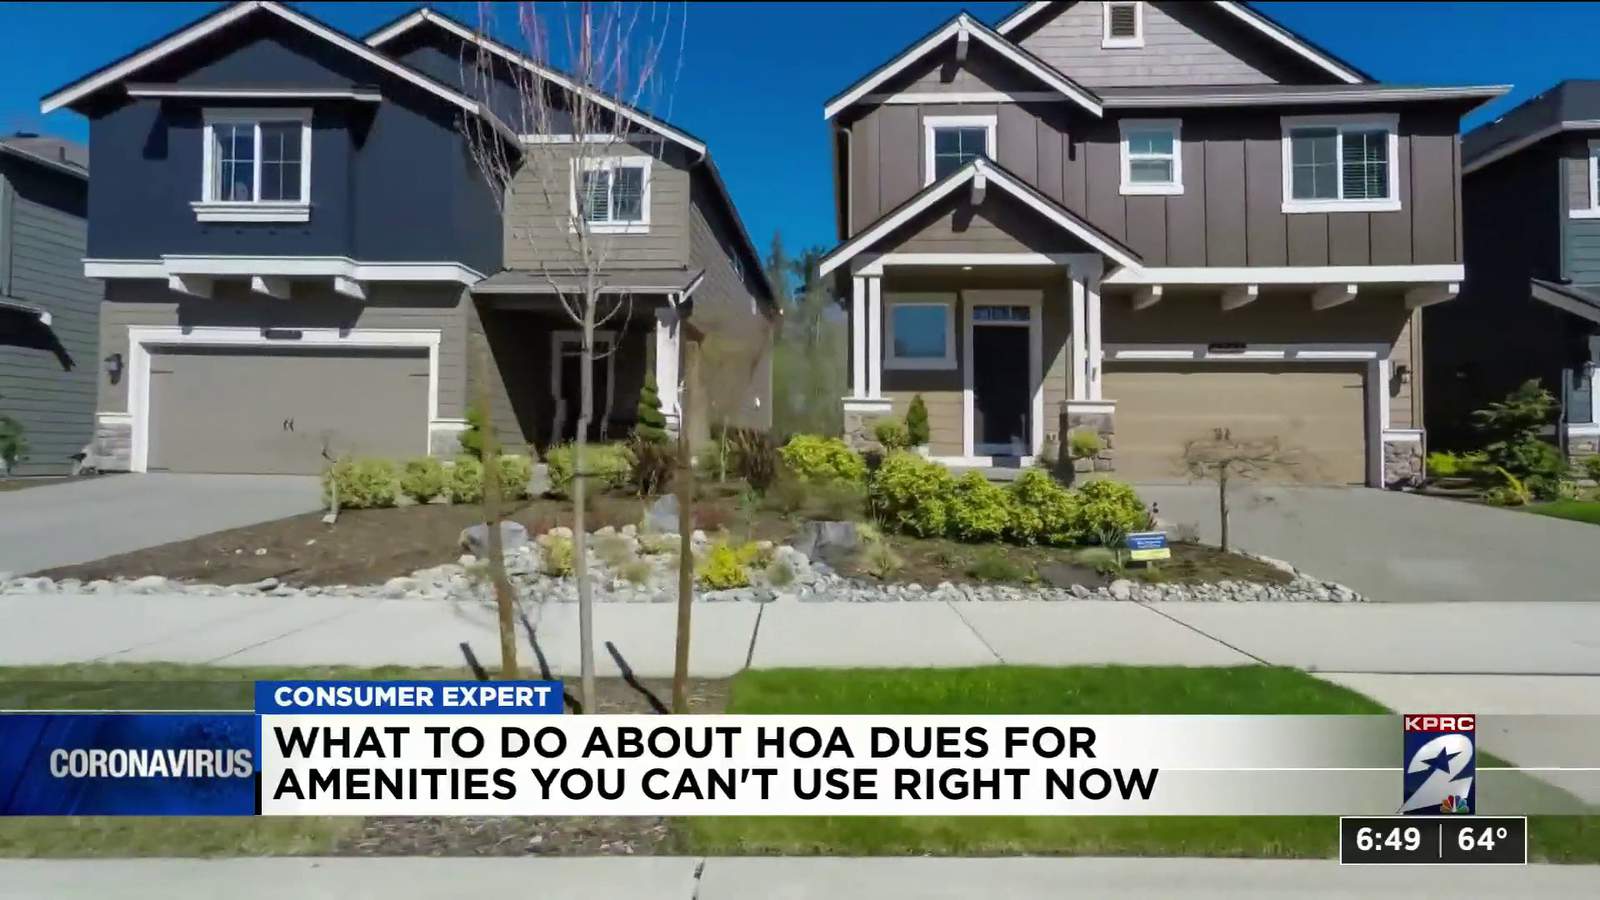 Homeowners want HOA dues refunds for amenities they can’t use